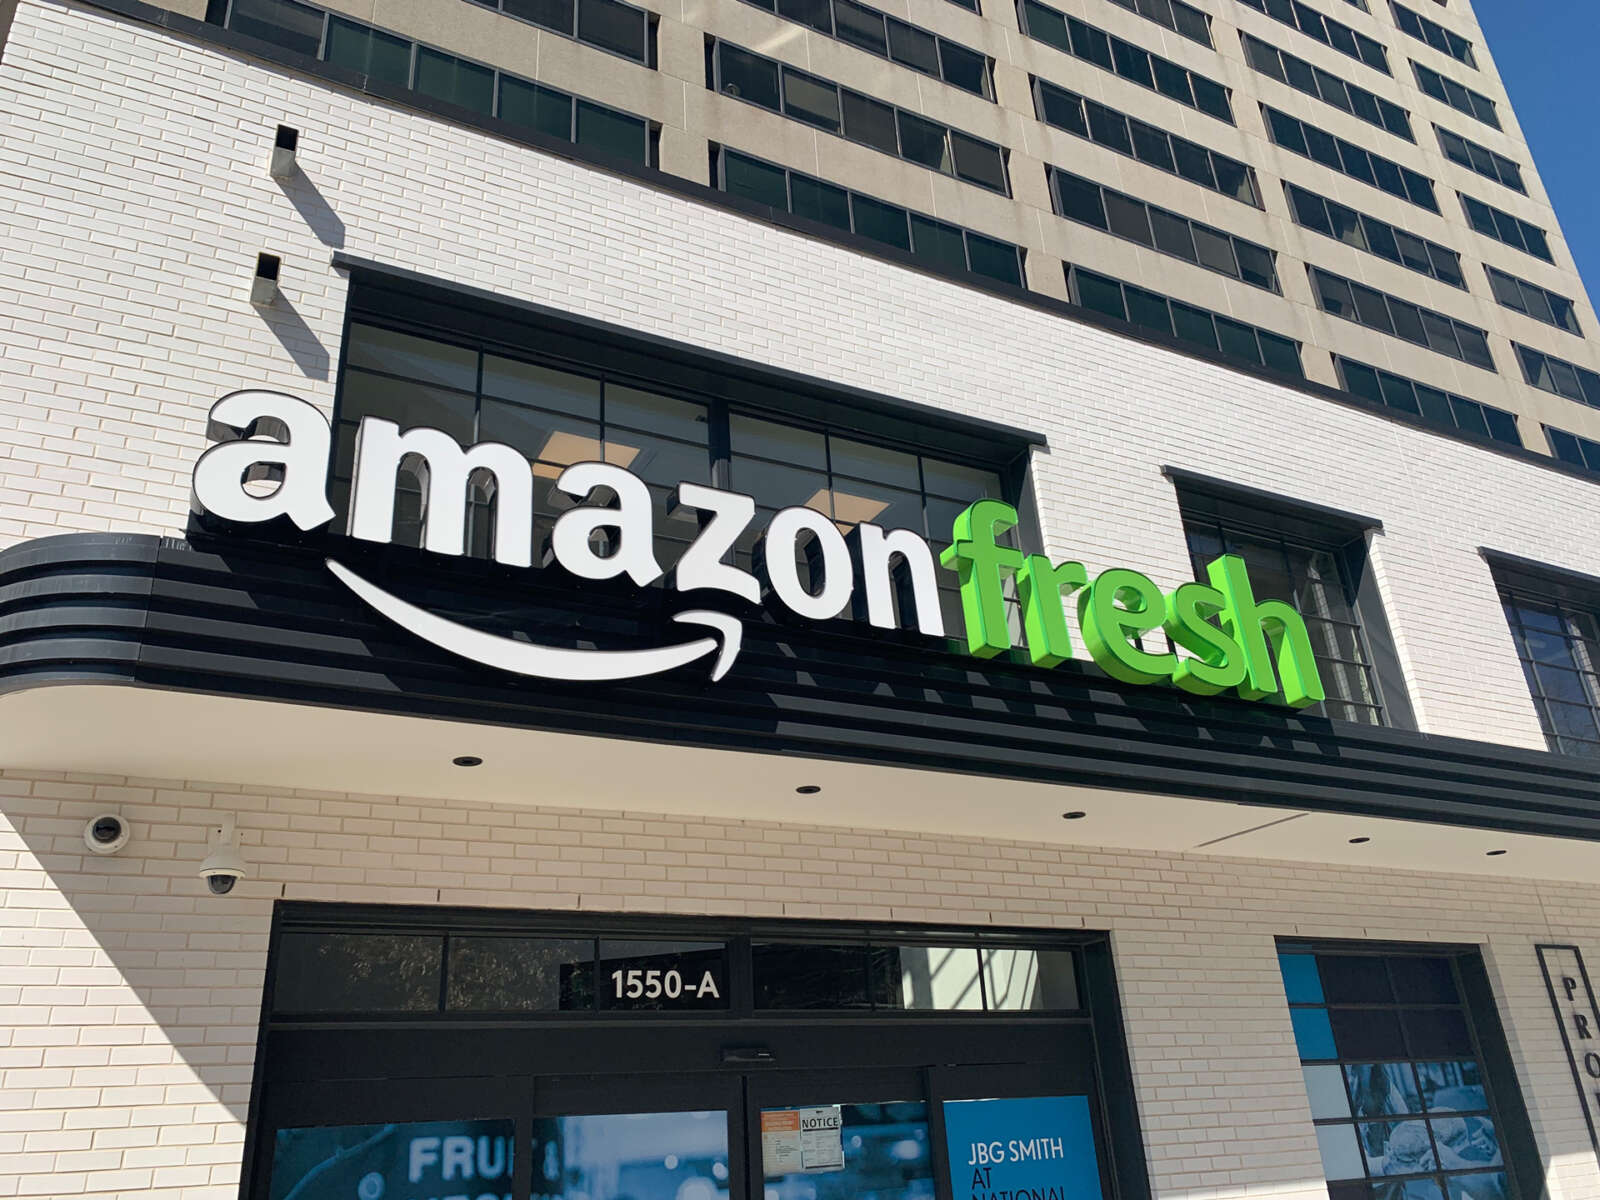 Fresh is now open in Crystal City